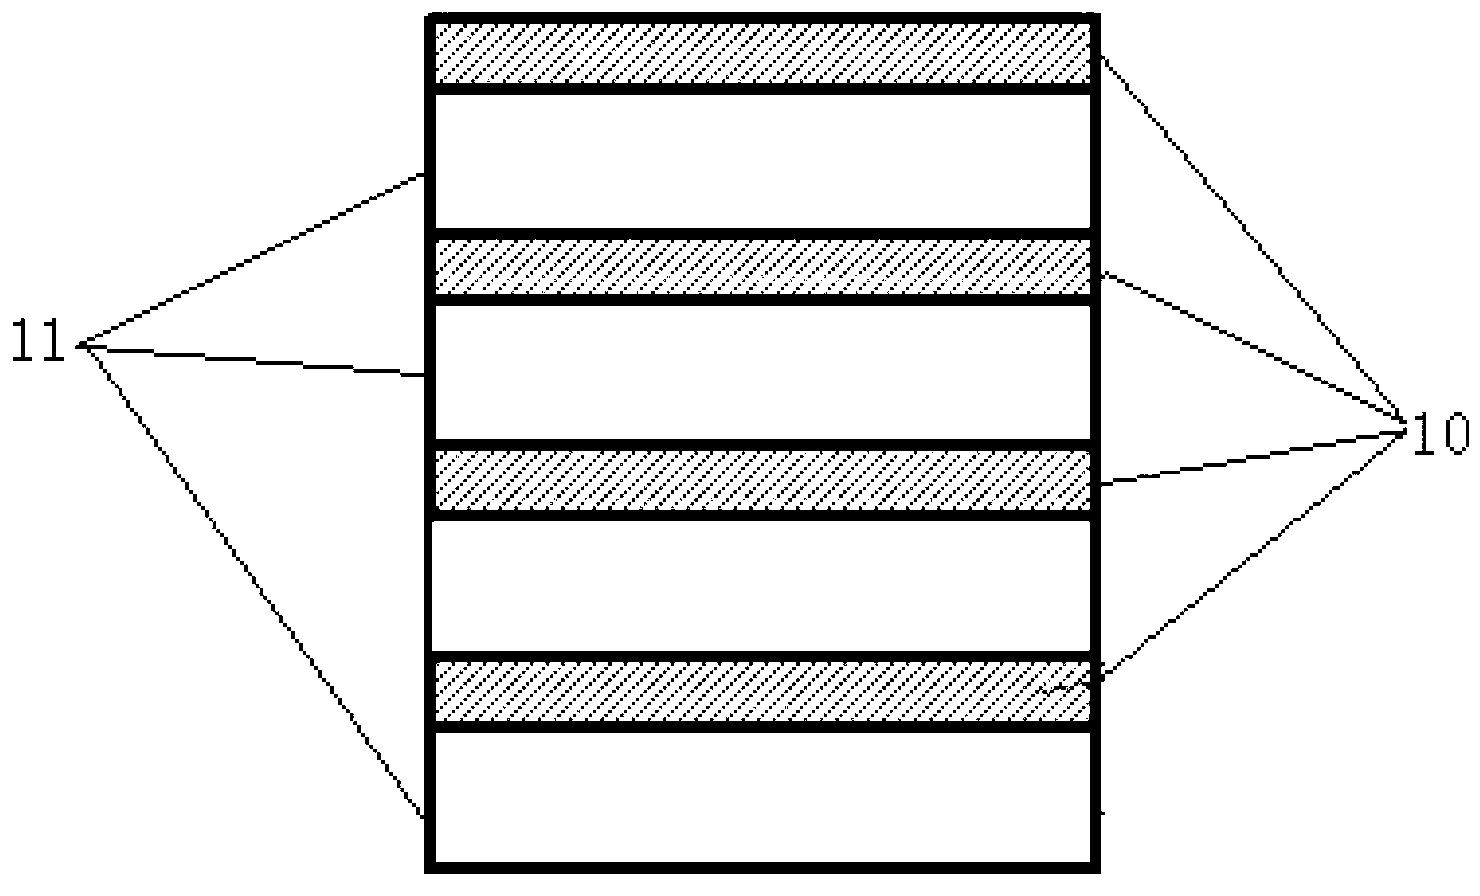 Electroluminescent diode device